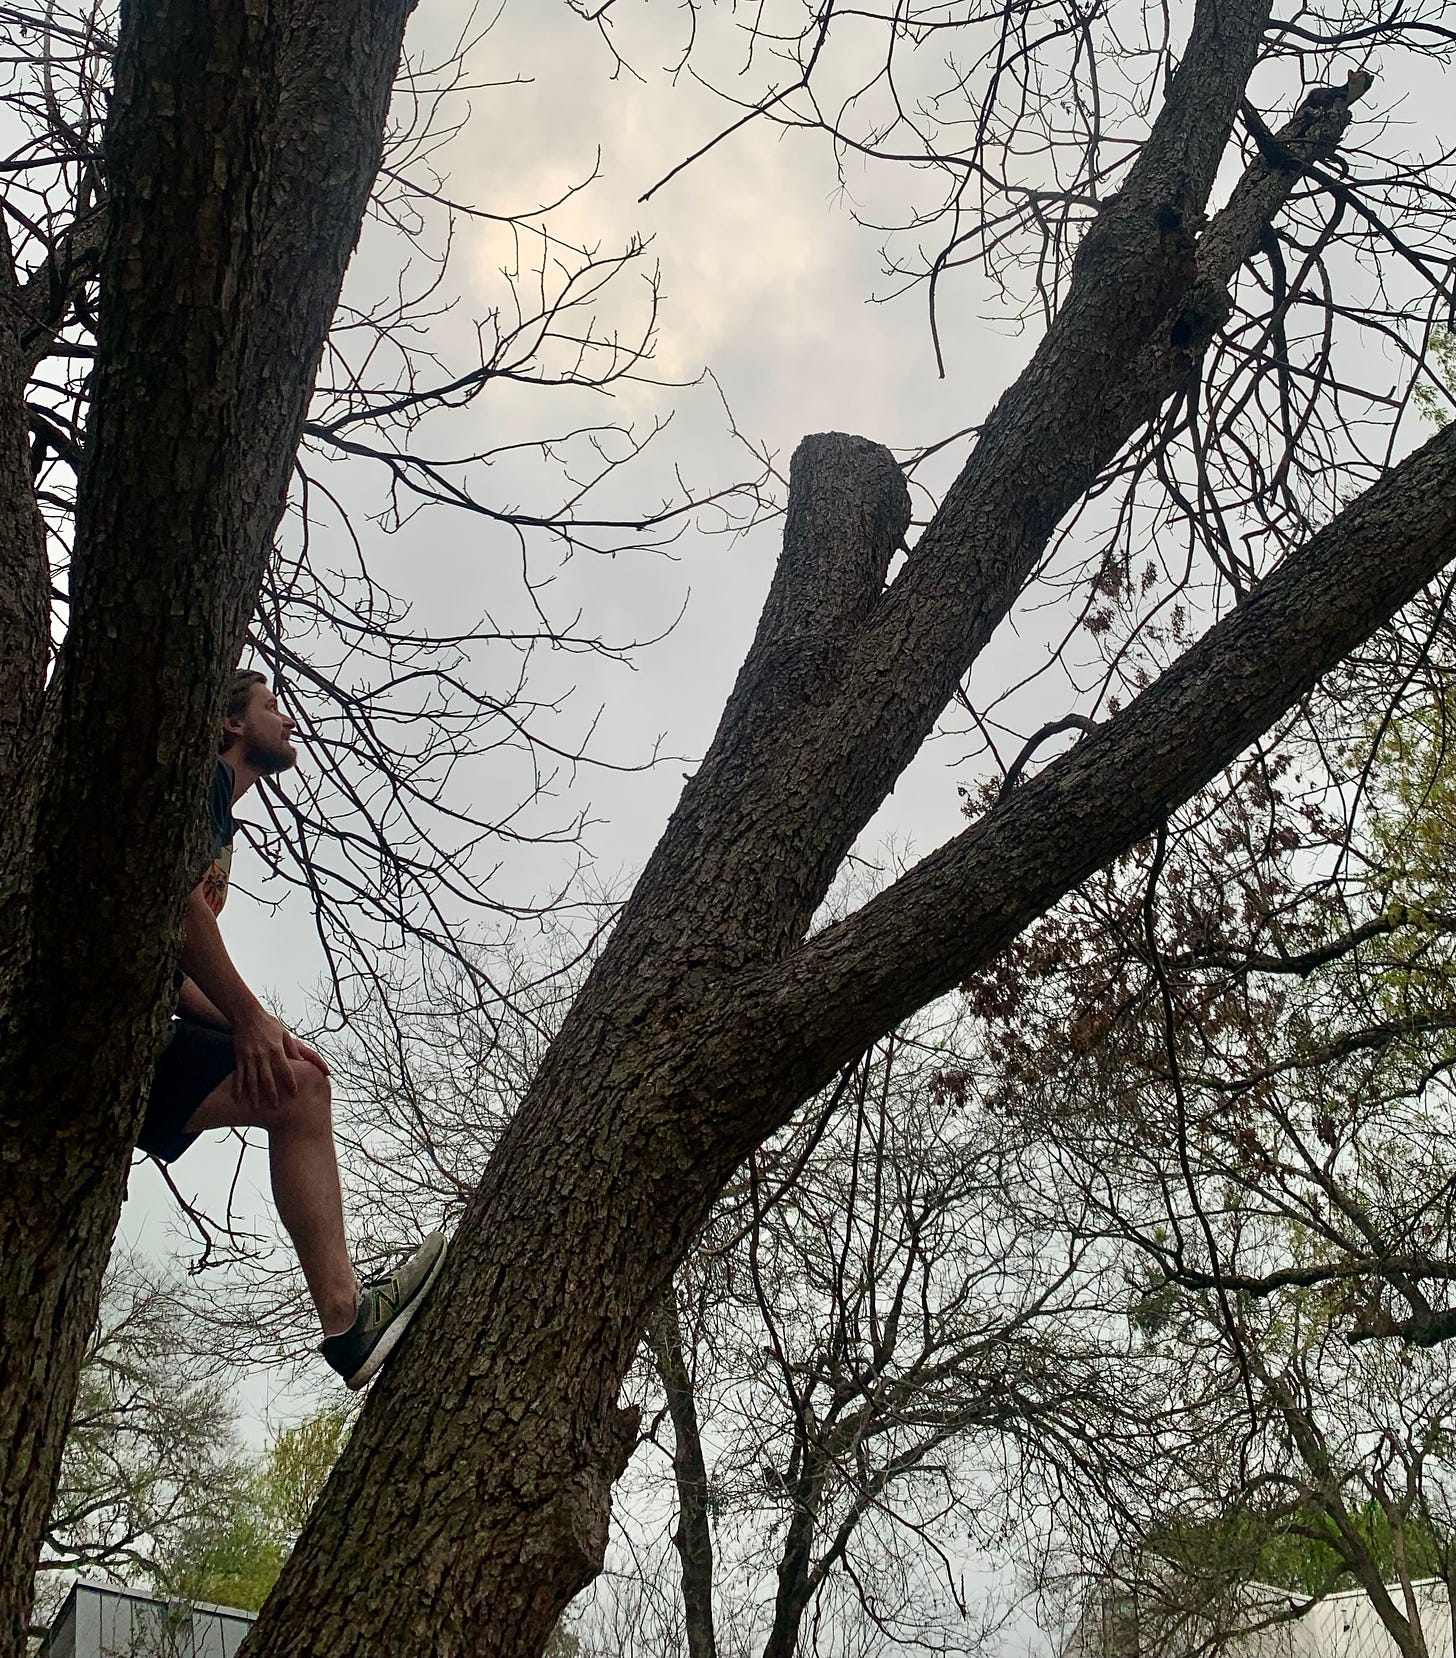 Man and cat in tree